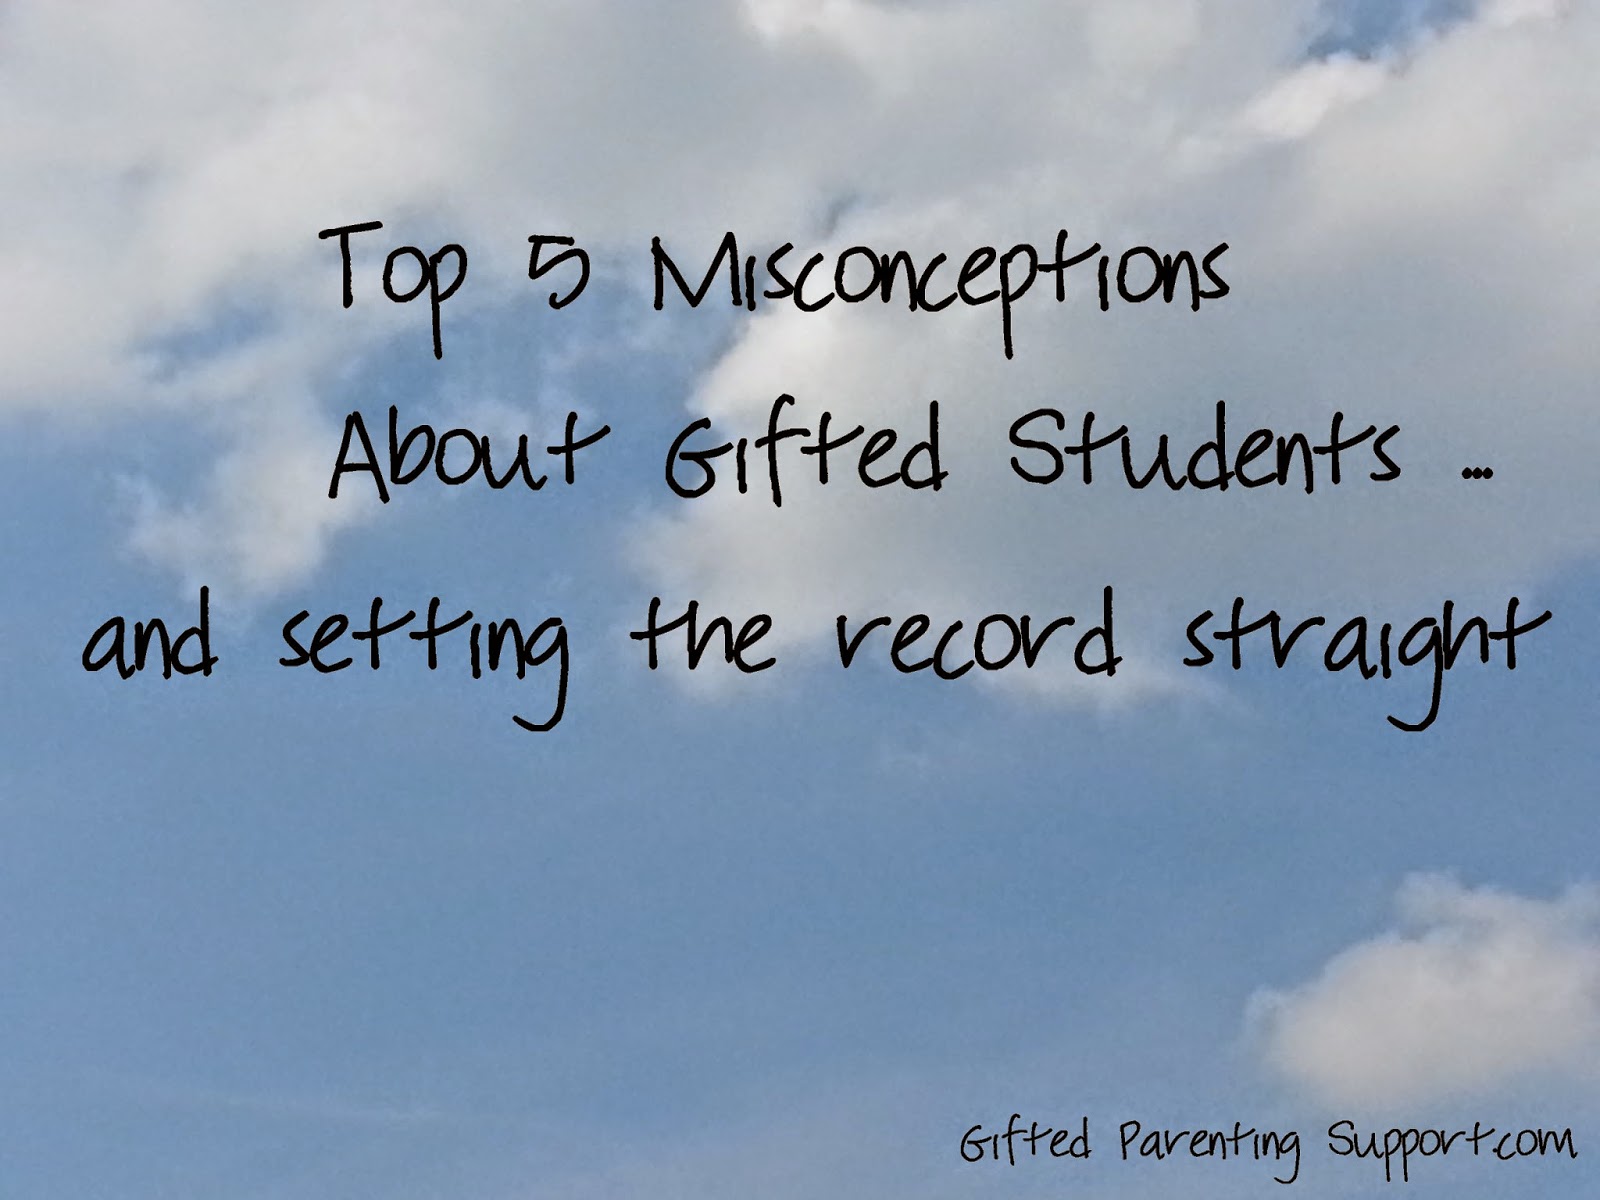 Many Articles Have Been Written About The Misconceptions Surrounding Gifted Students But I Want To Address Top 5 Which Feel Are Most Detrimental